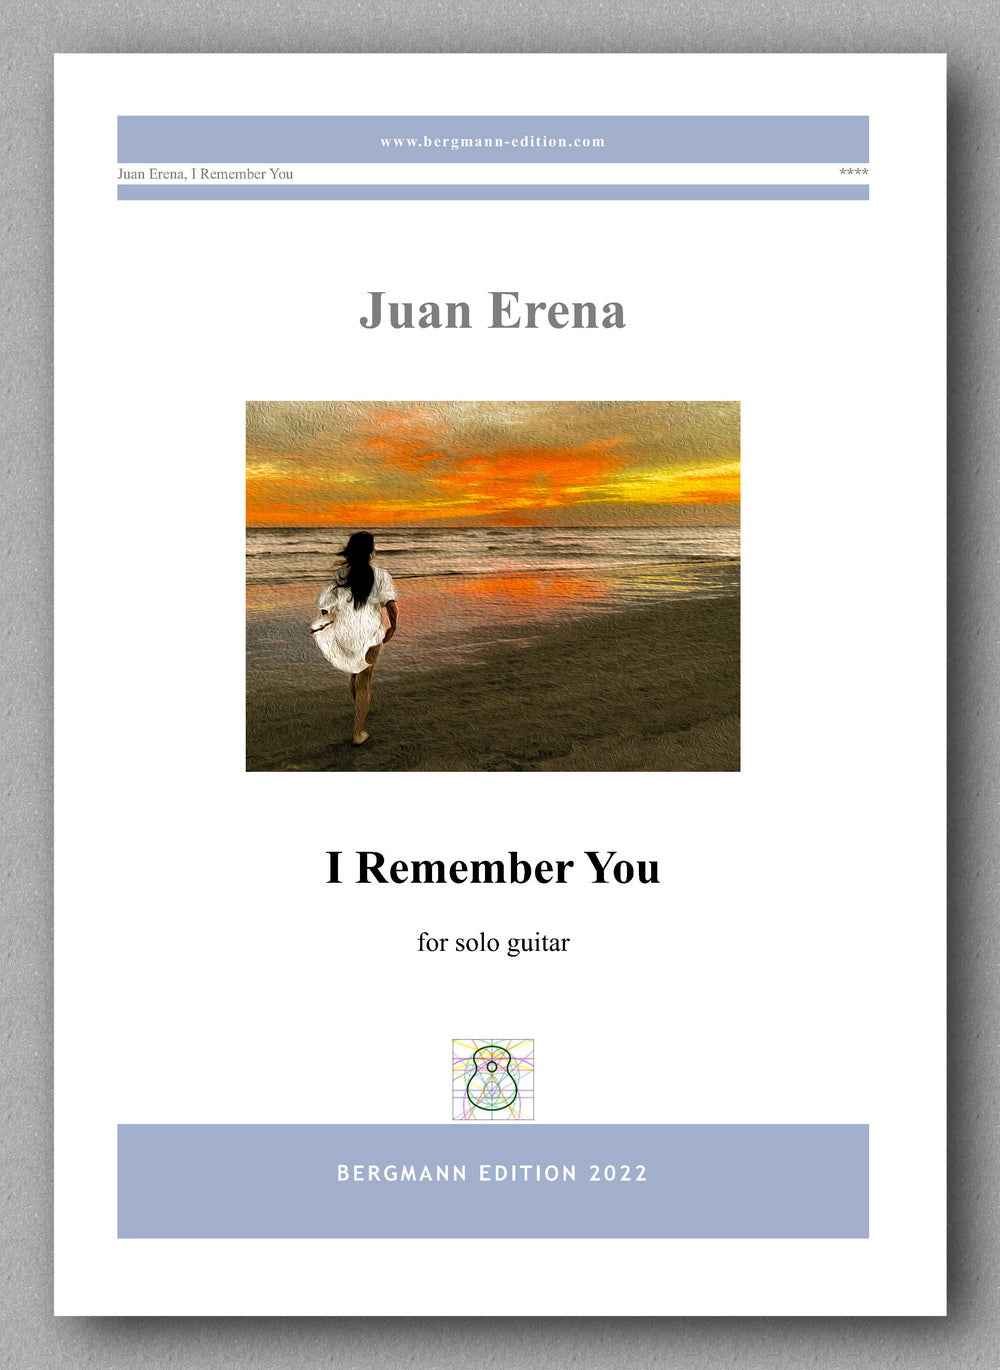 Juan Erena, I Remember You - preview of the cover